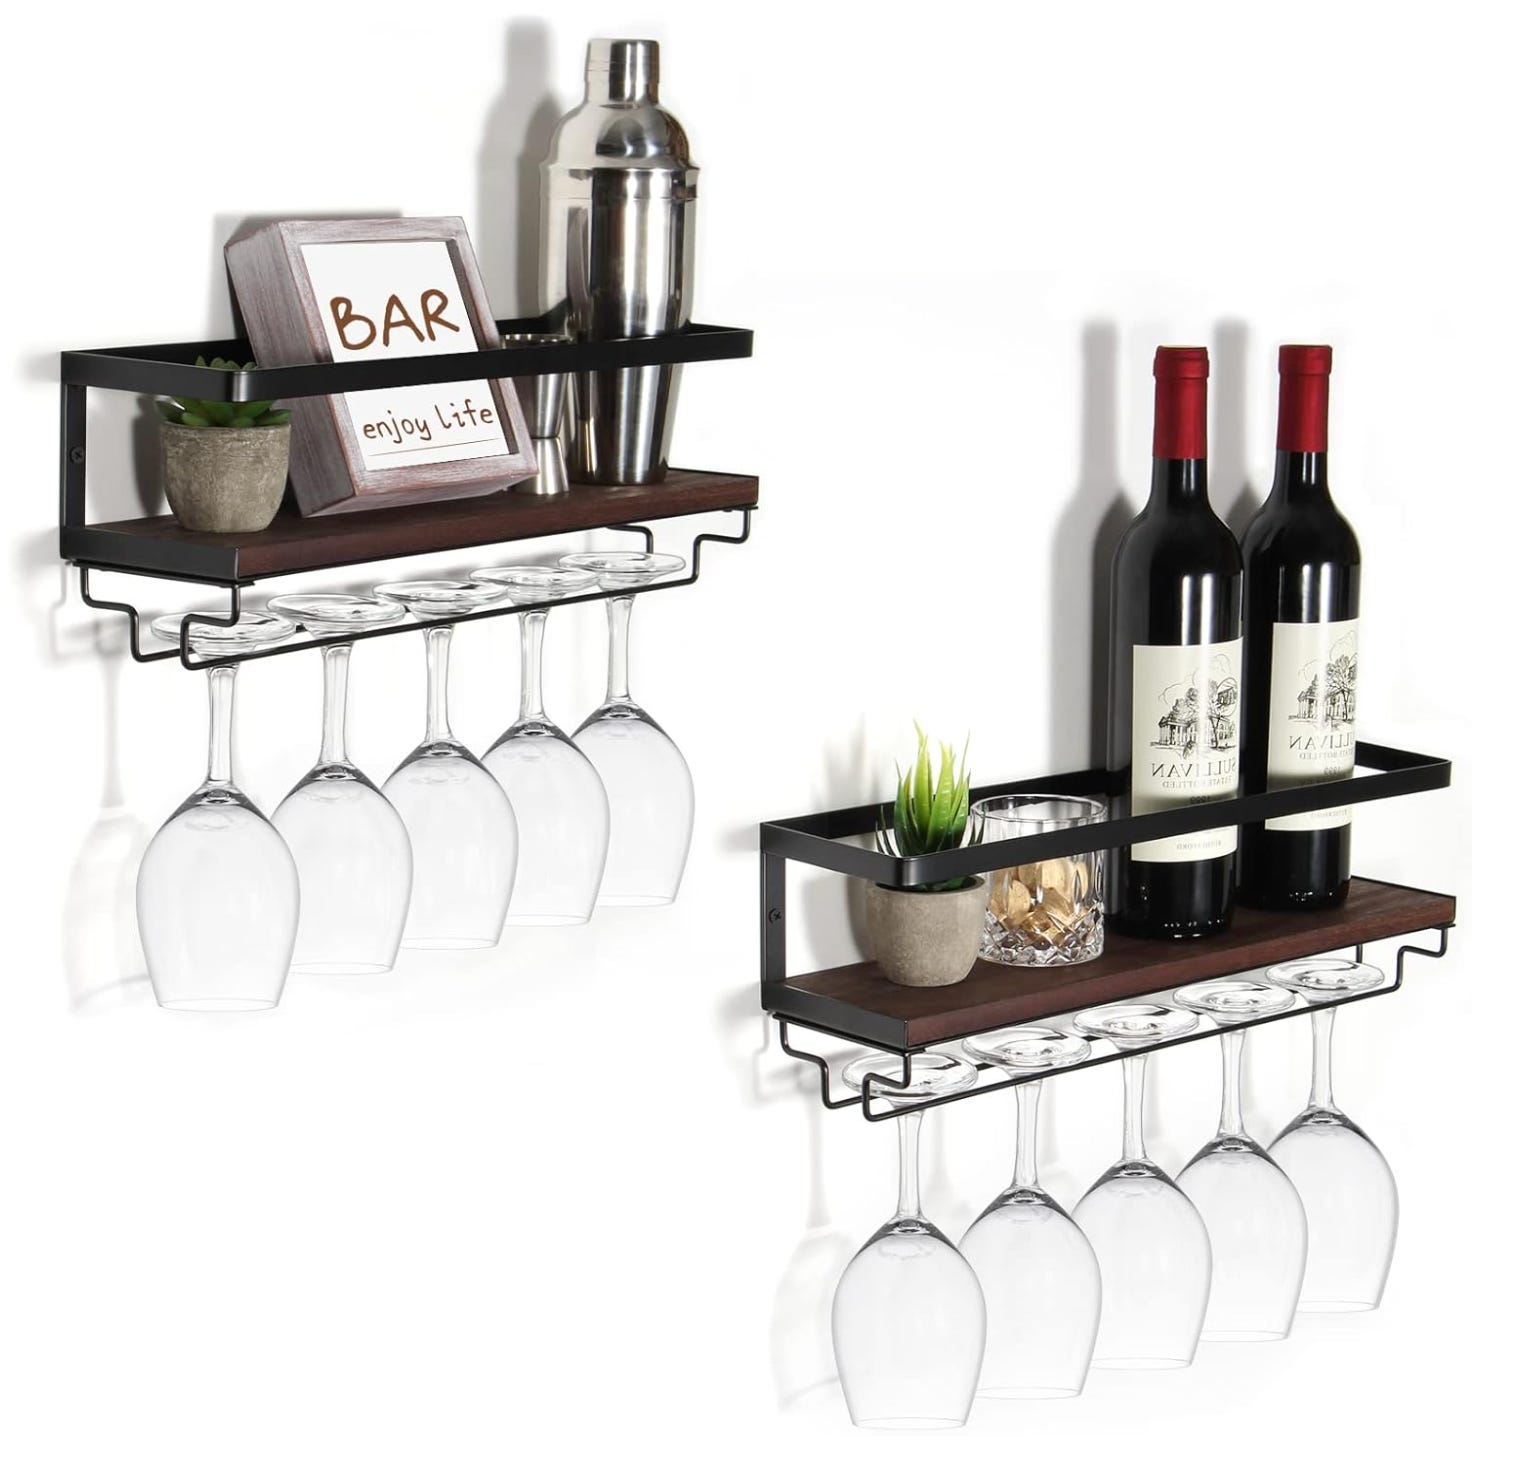 Gift Company Debuts Wearable Wine Rack That Doubles As a Bra